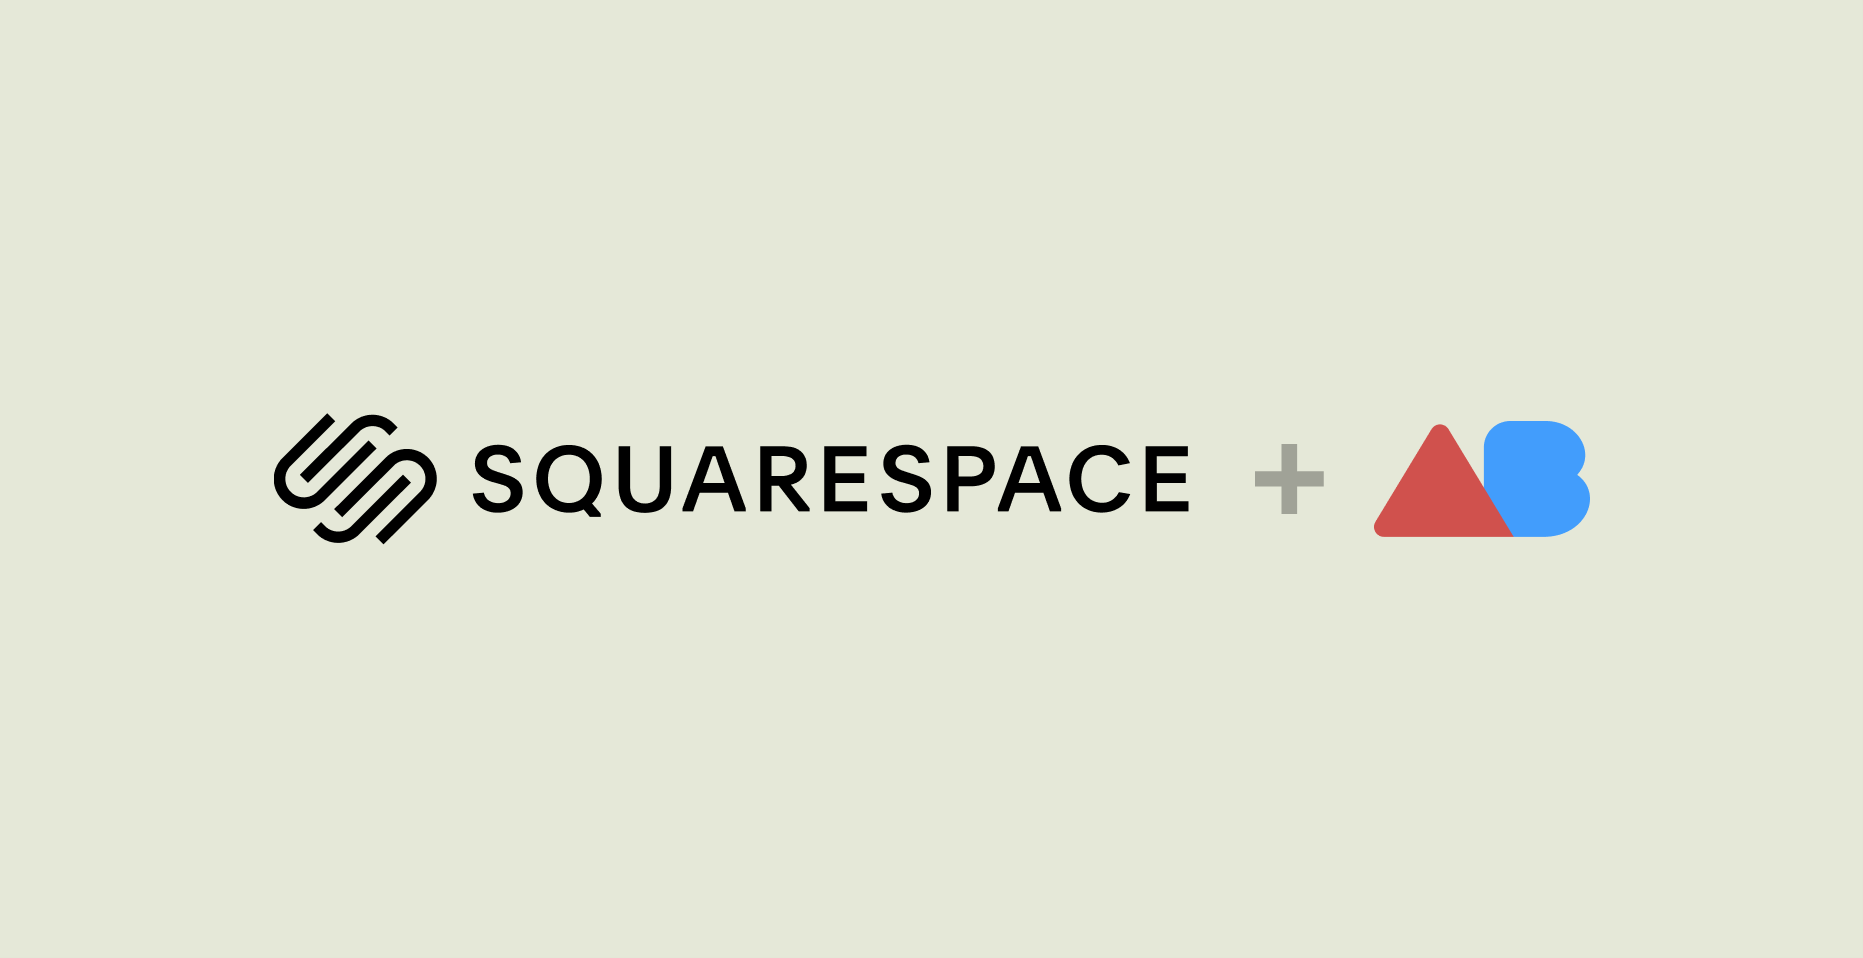 How to do A/B testing on a Squarespace site